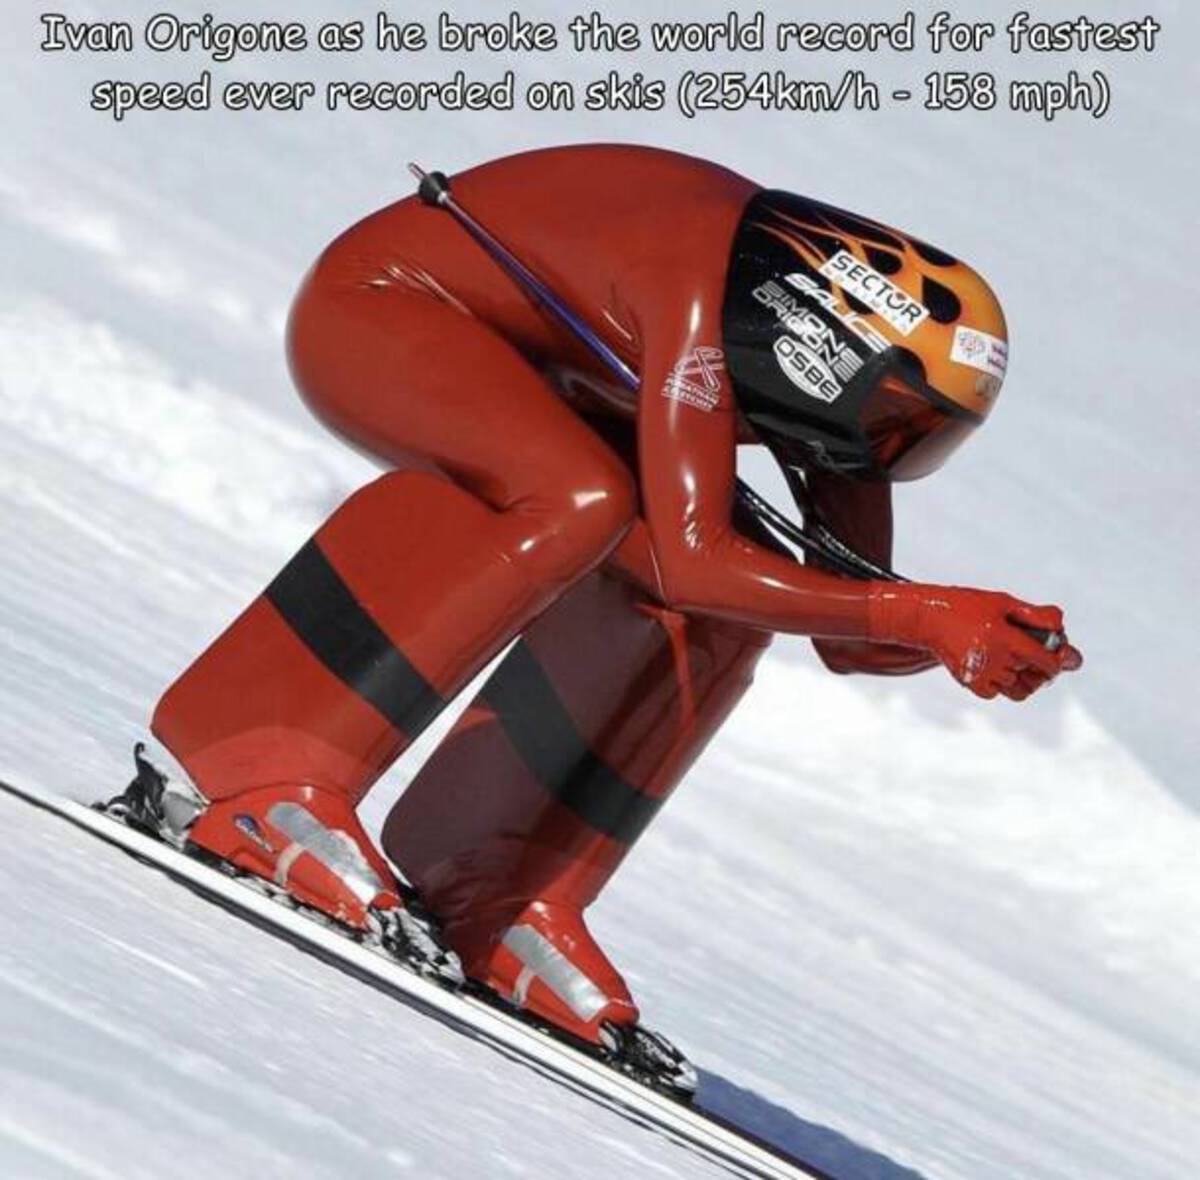 ski binding - Ivan Origone as he broke the world record for fastest speed ever recorded on skis mh 158 mph Camo Sector Osbe N 925